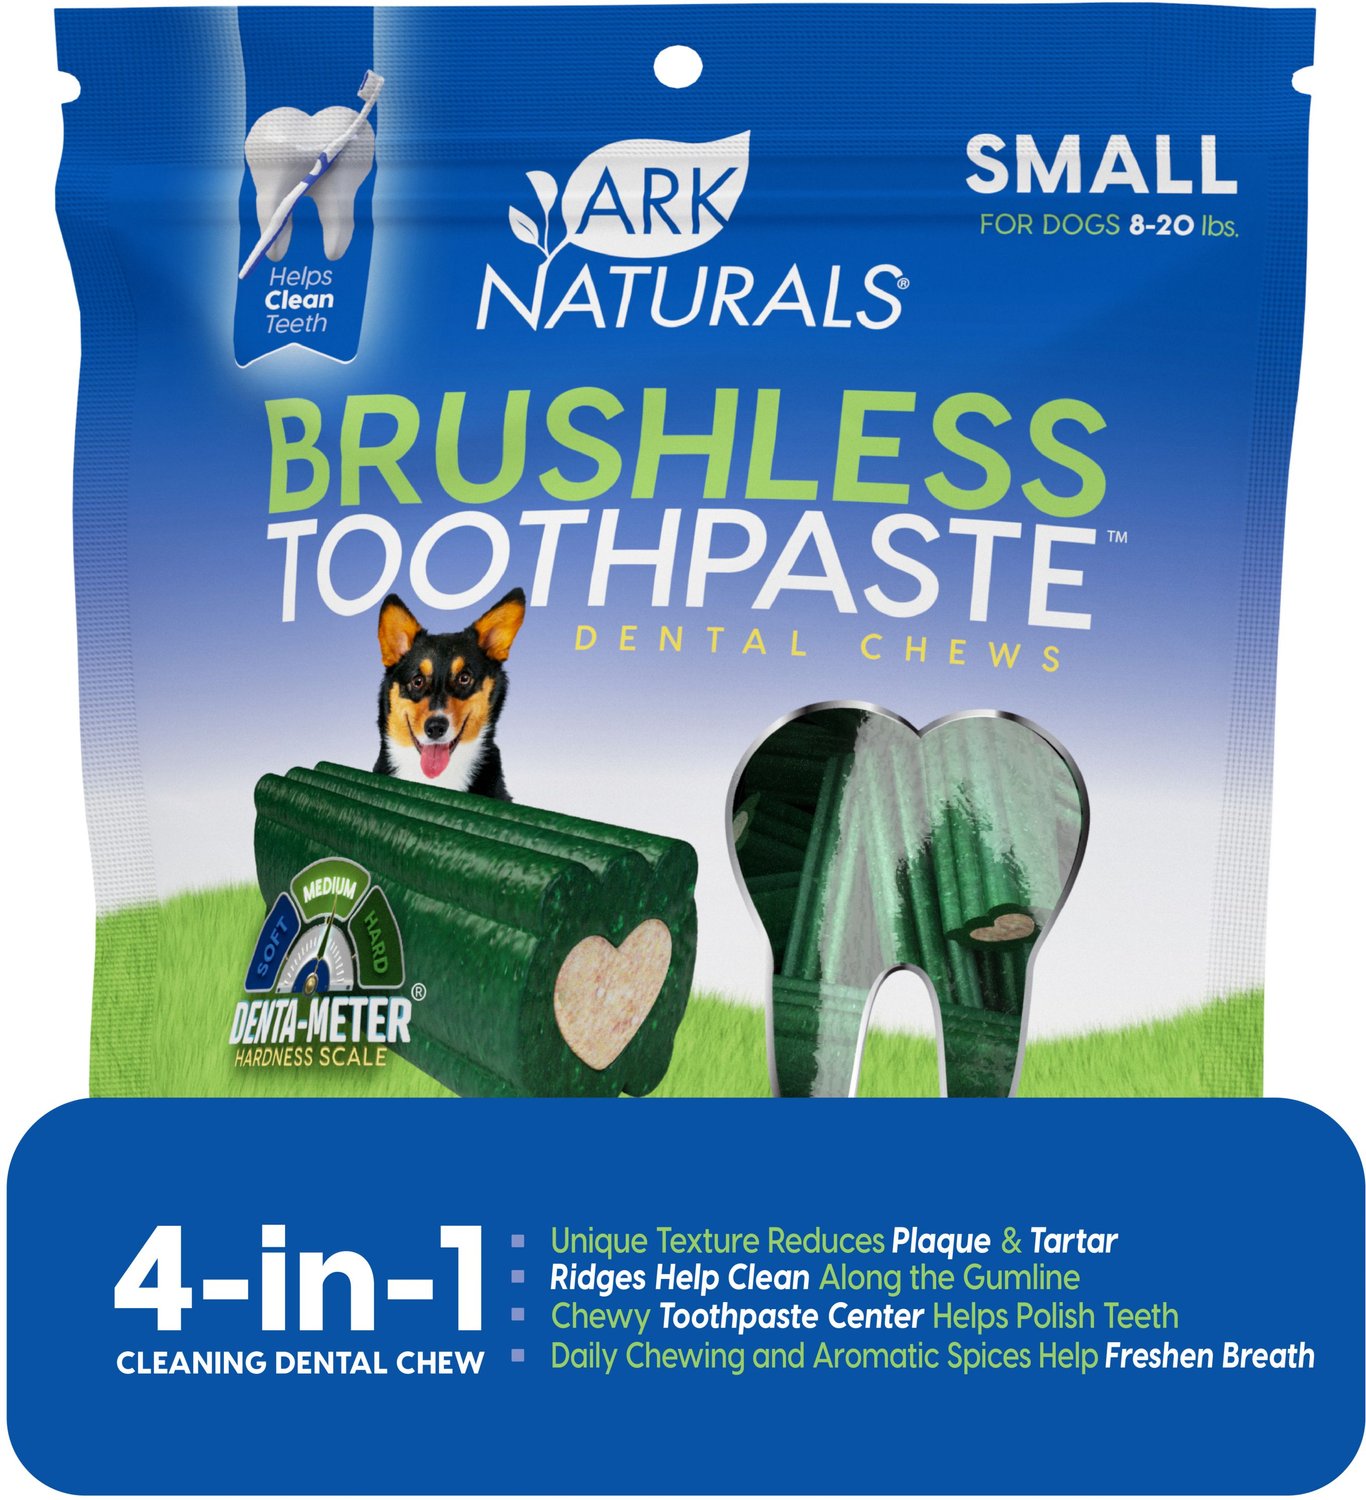 ARK NATURALS Brushless Toothpaste Small 